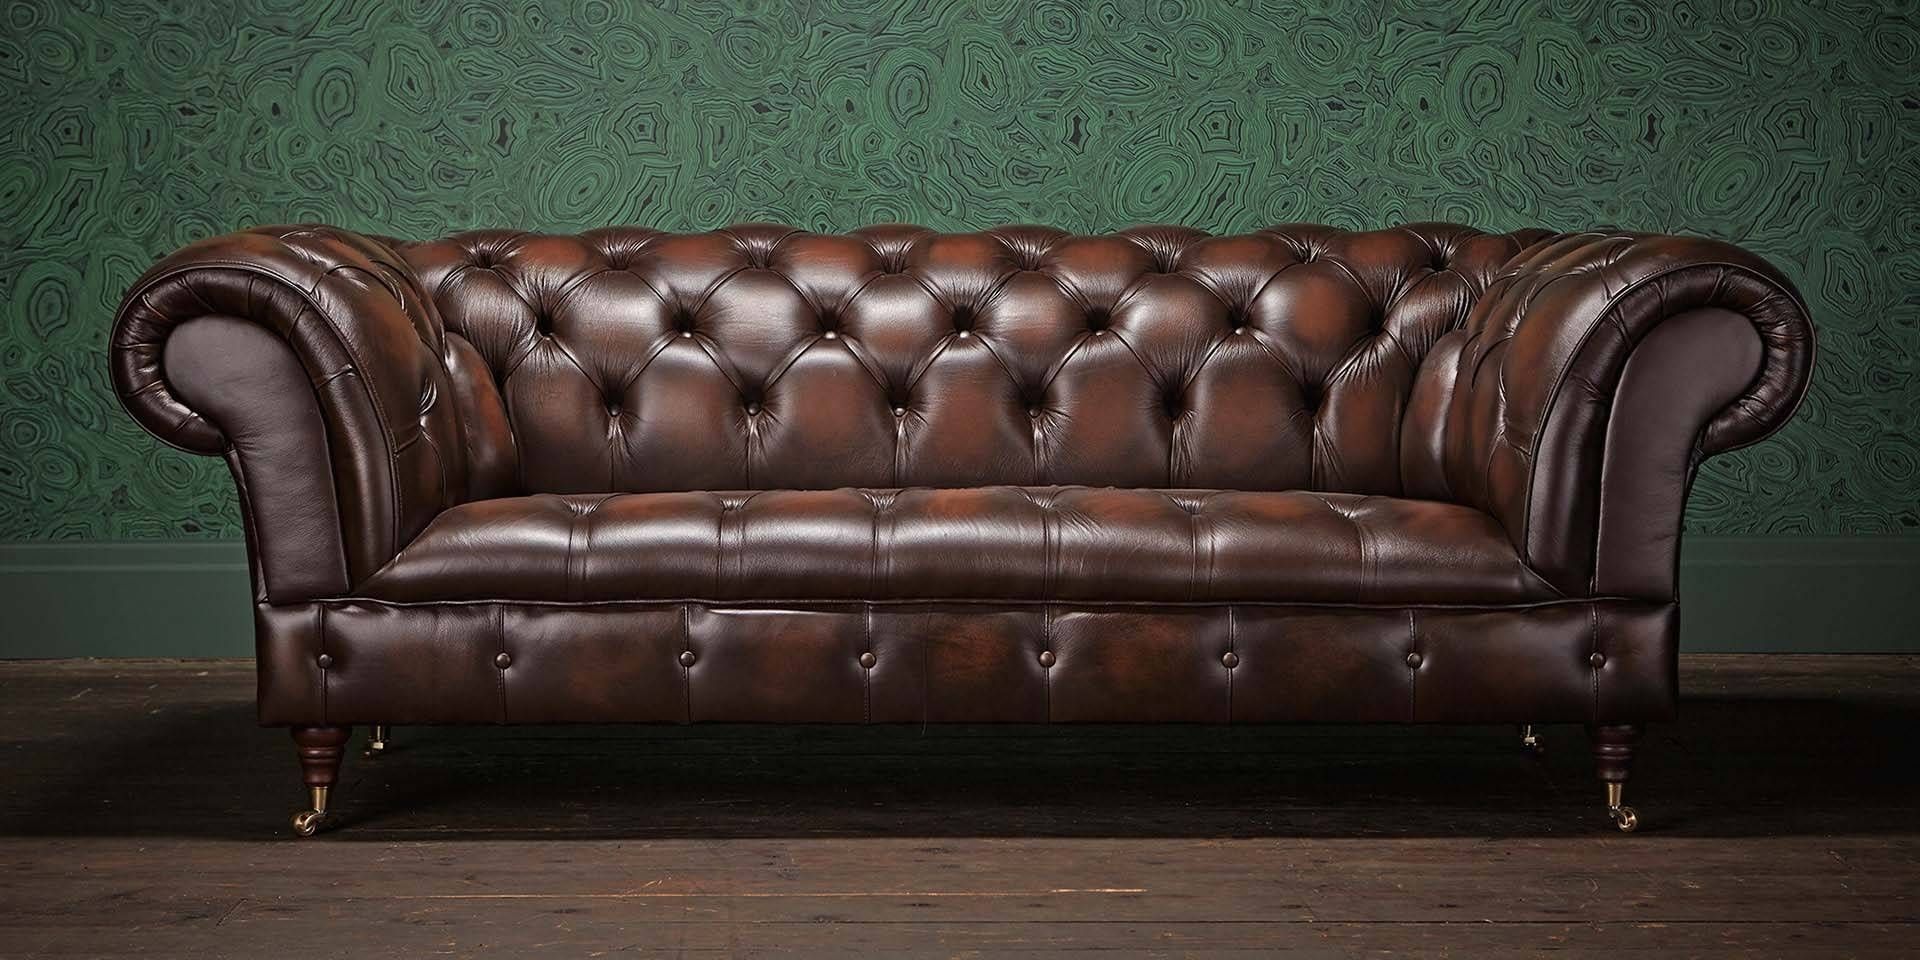 Chesterfields Of England | The Original Chesterfield Company With Regard To Chesterfield Sofas And Chairs (View 1 of 15)